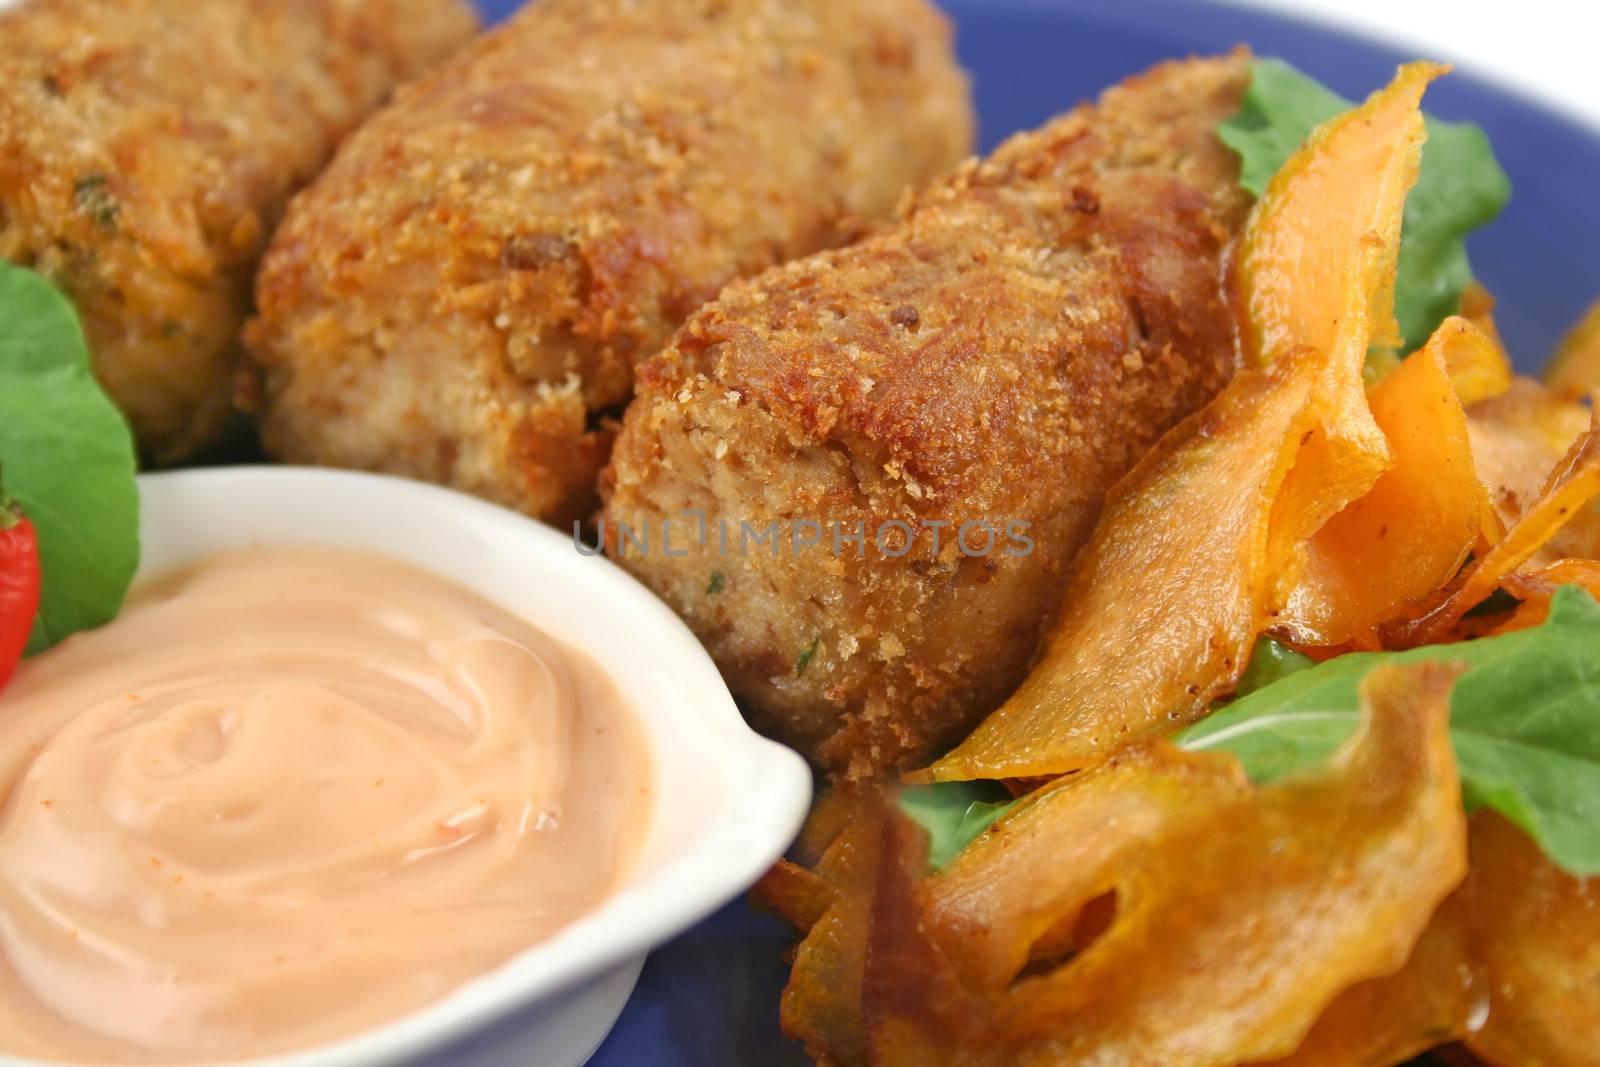 Crumbed tuna croquettes with sweet potatoes and a rocket salad.